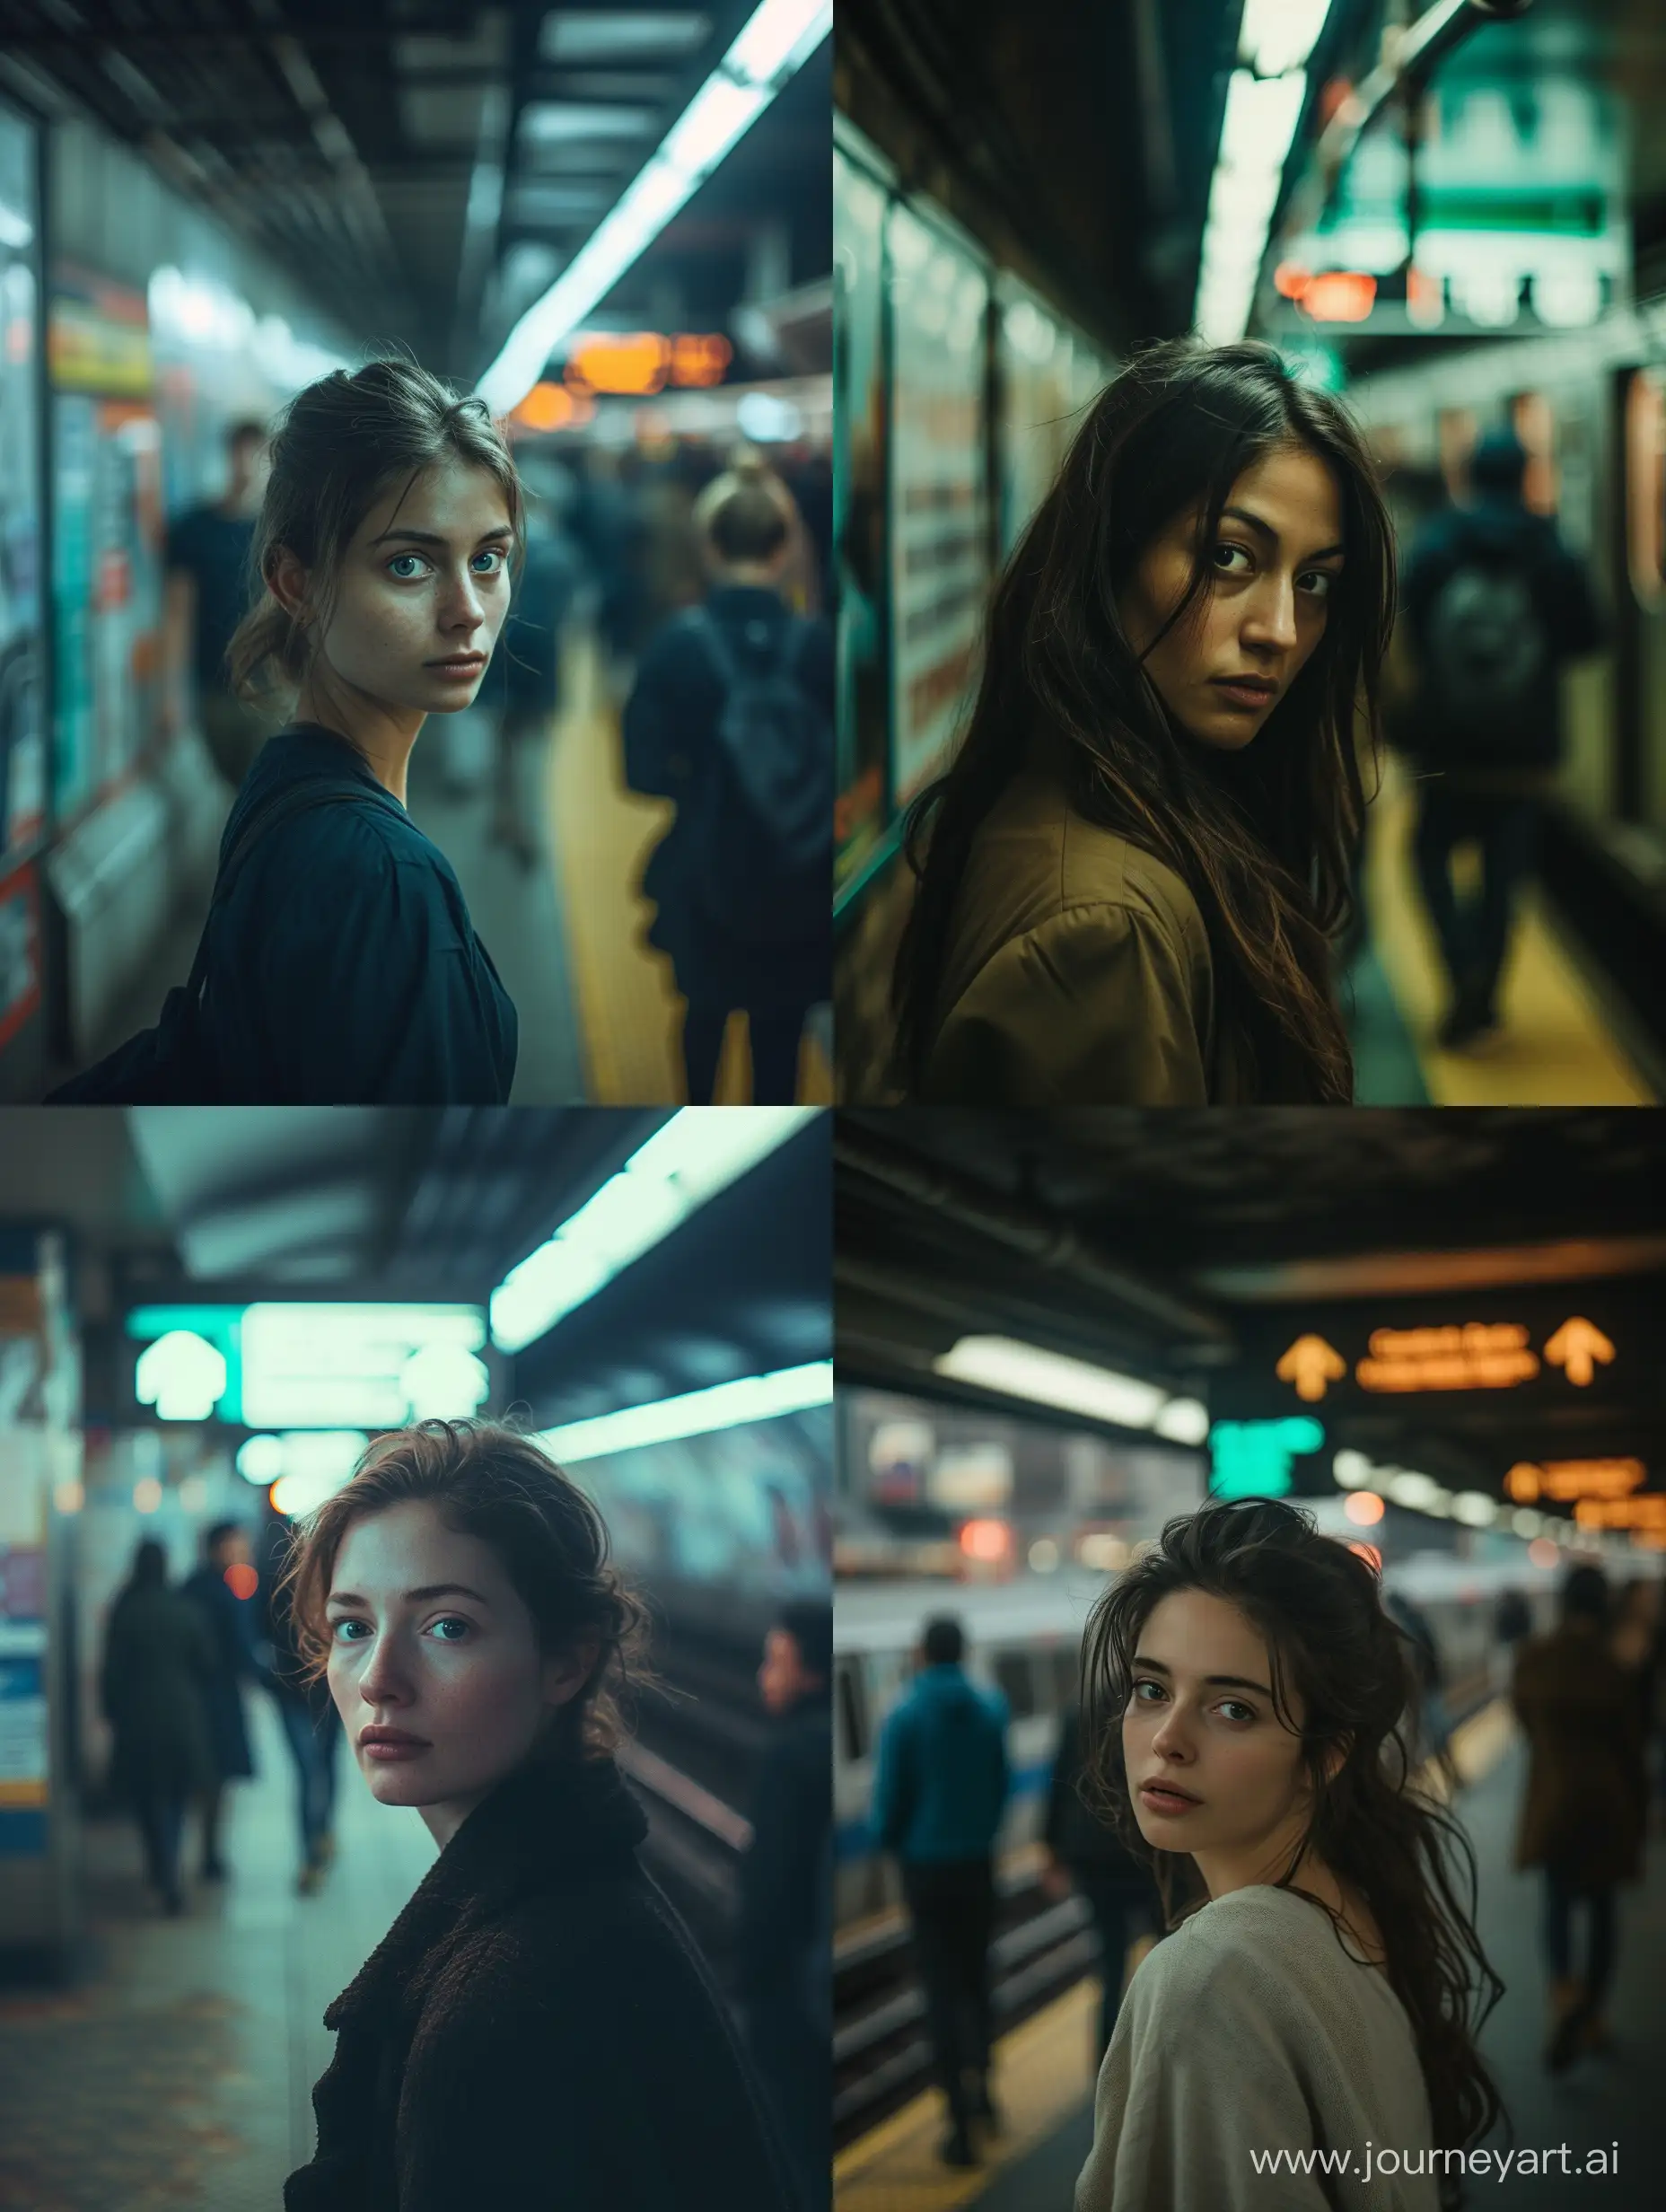 Contemplative-Woman-in-Subway-Station-Urban-Melancholy-Cinematic-Composition